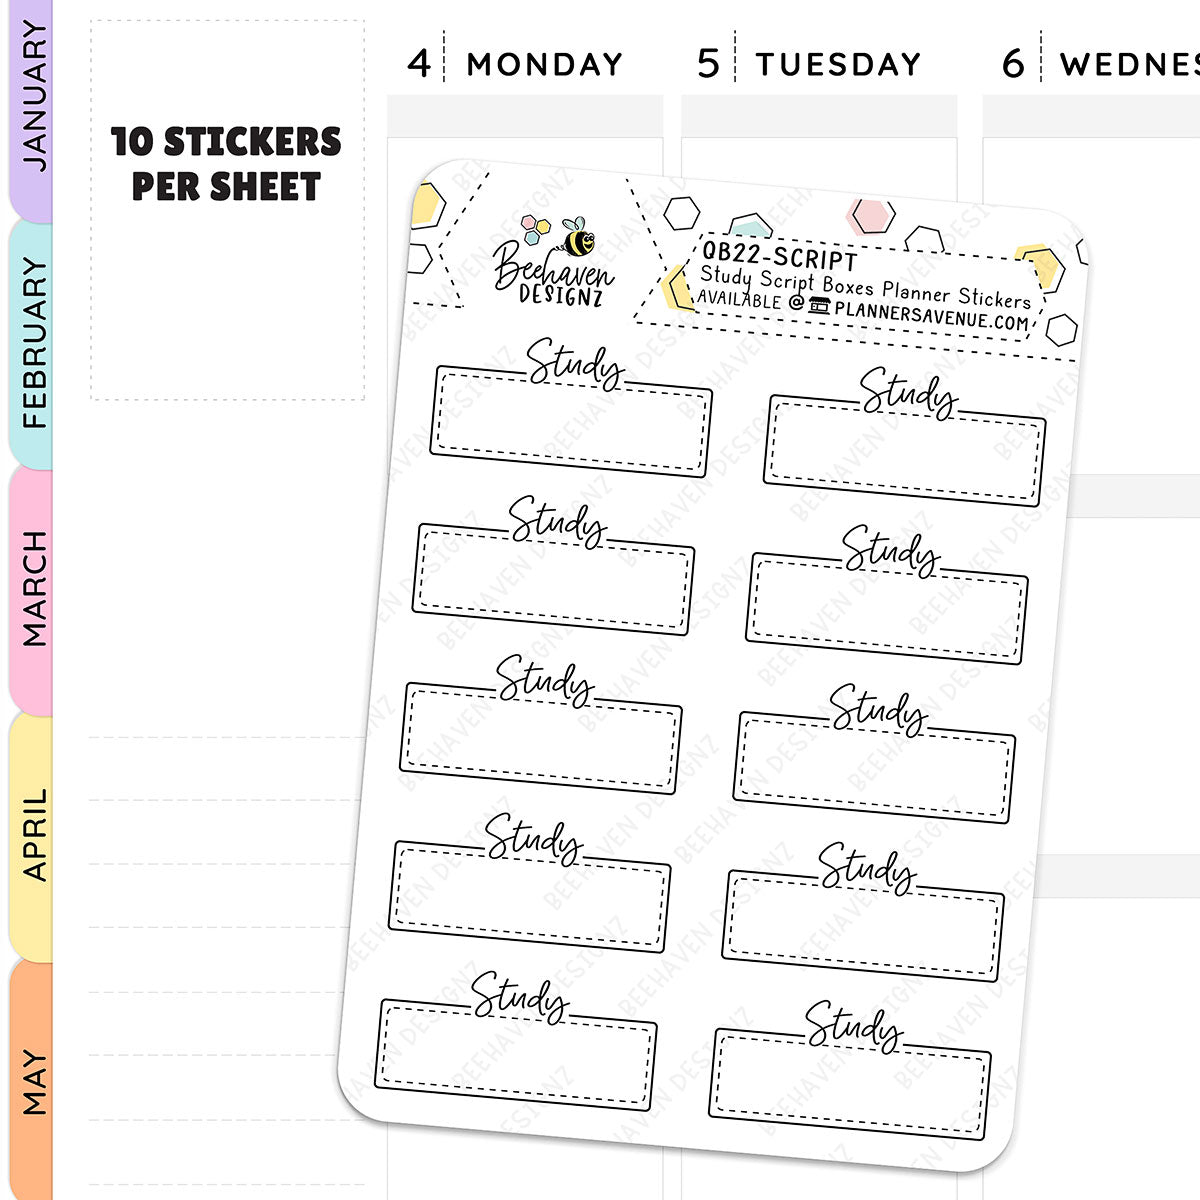 Study Script Boxes Planner Stickers